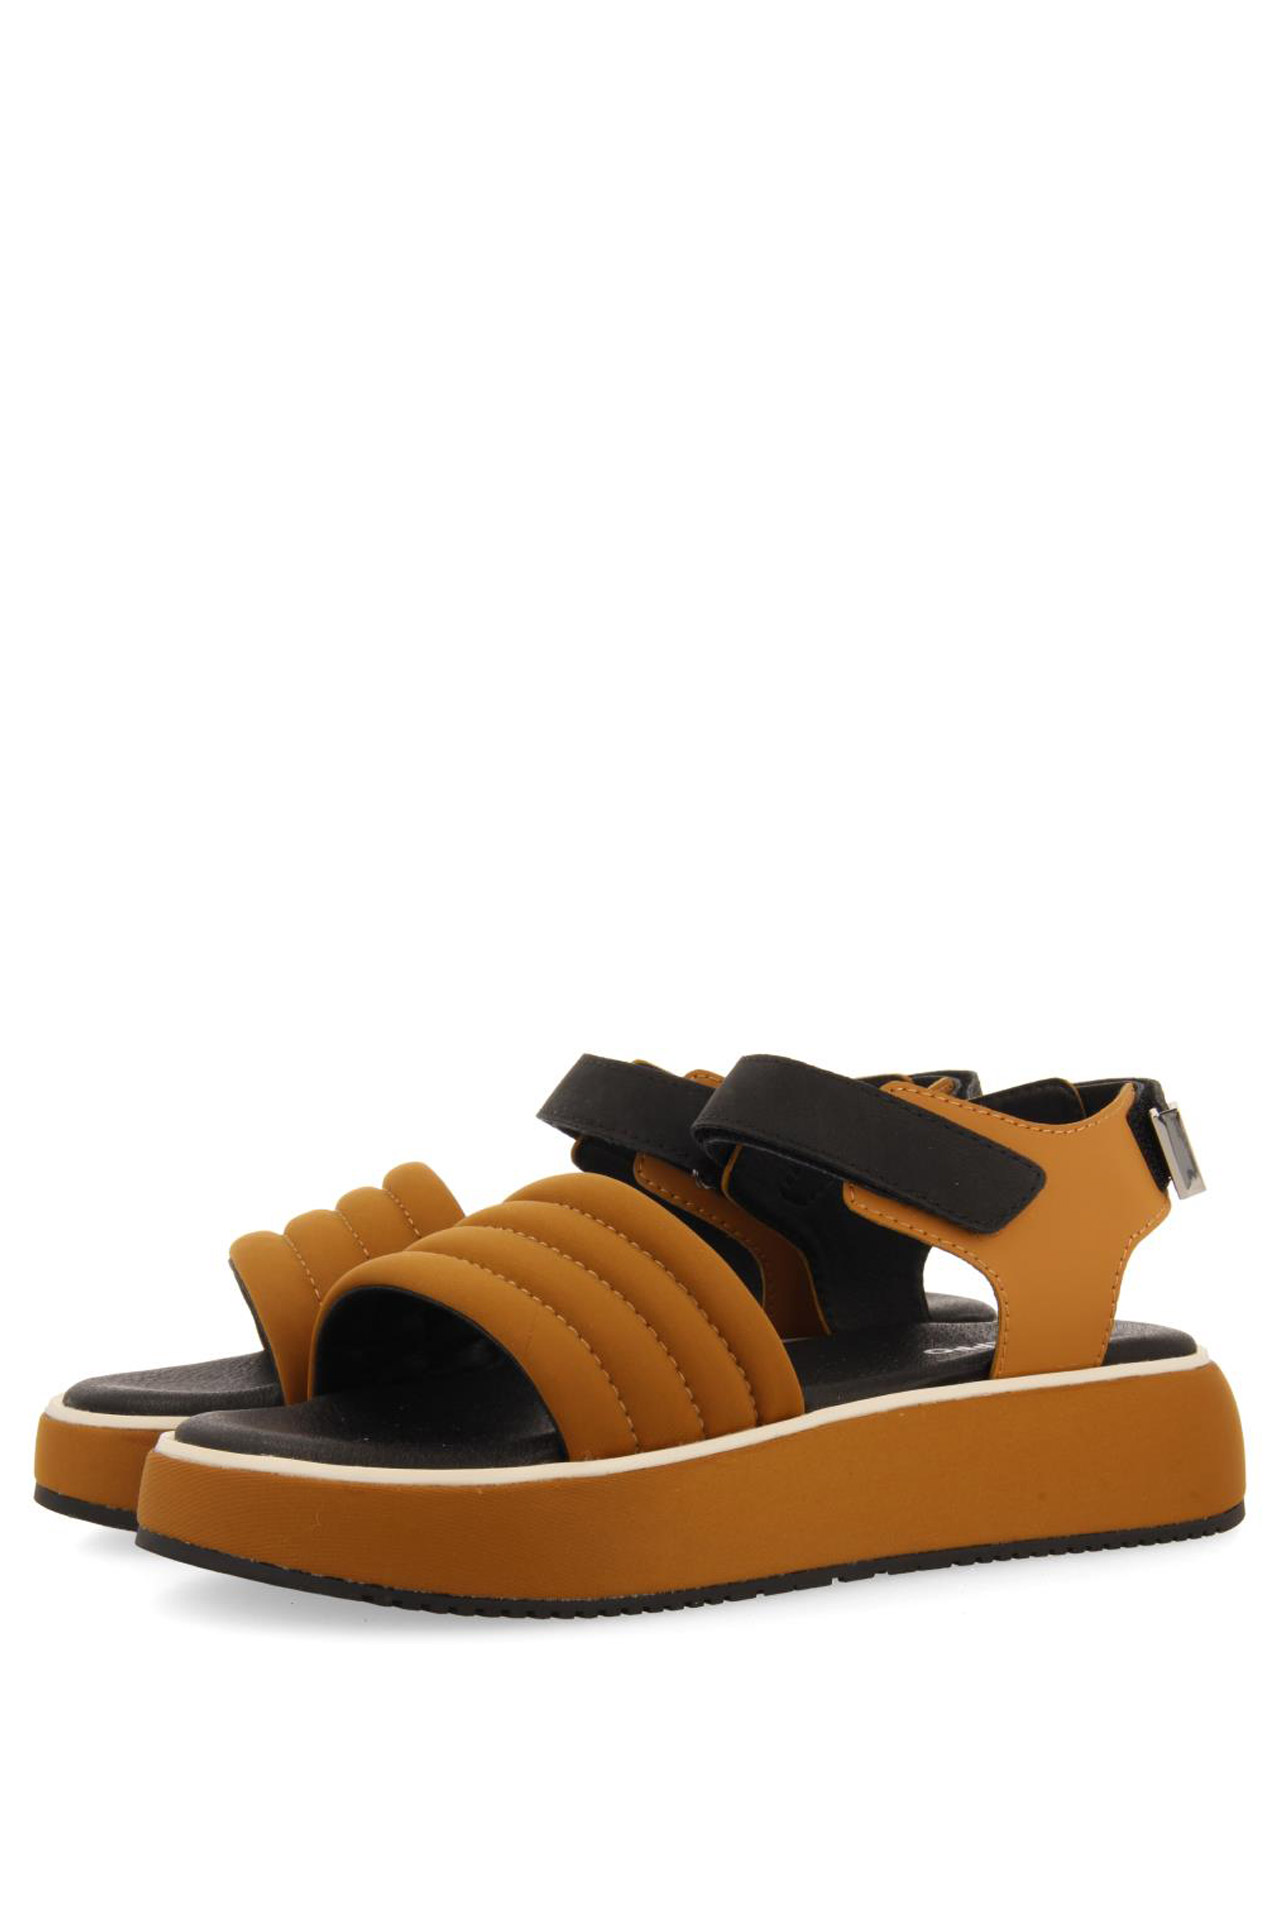 GIOSEPPO CHEVAL TABA SPORTS SANDALS WITH PLATFORM